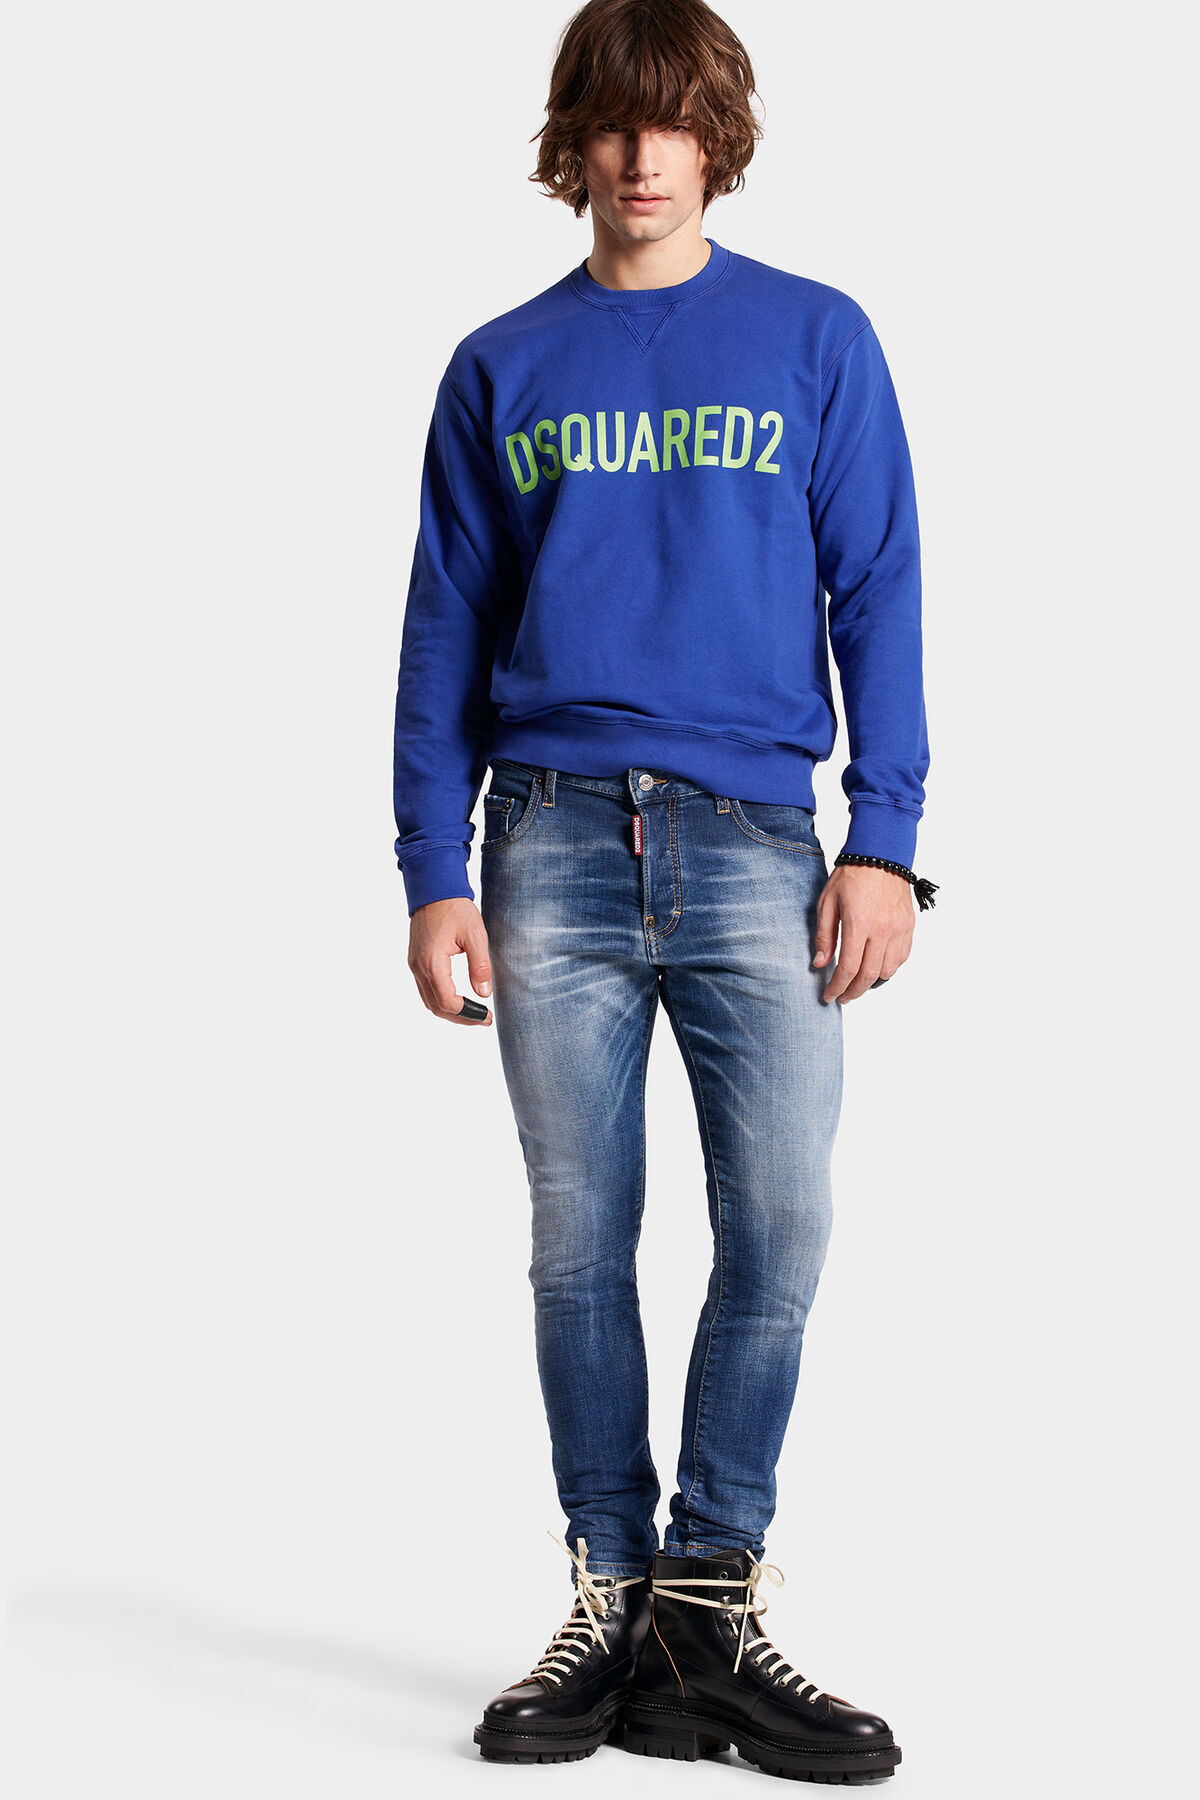 DSQUARED2 Jeans Skater in Washed Blue 50